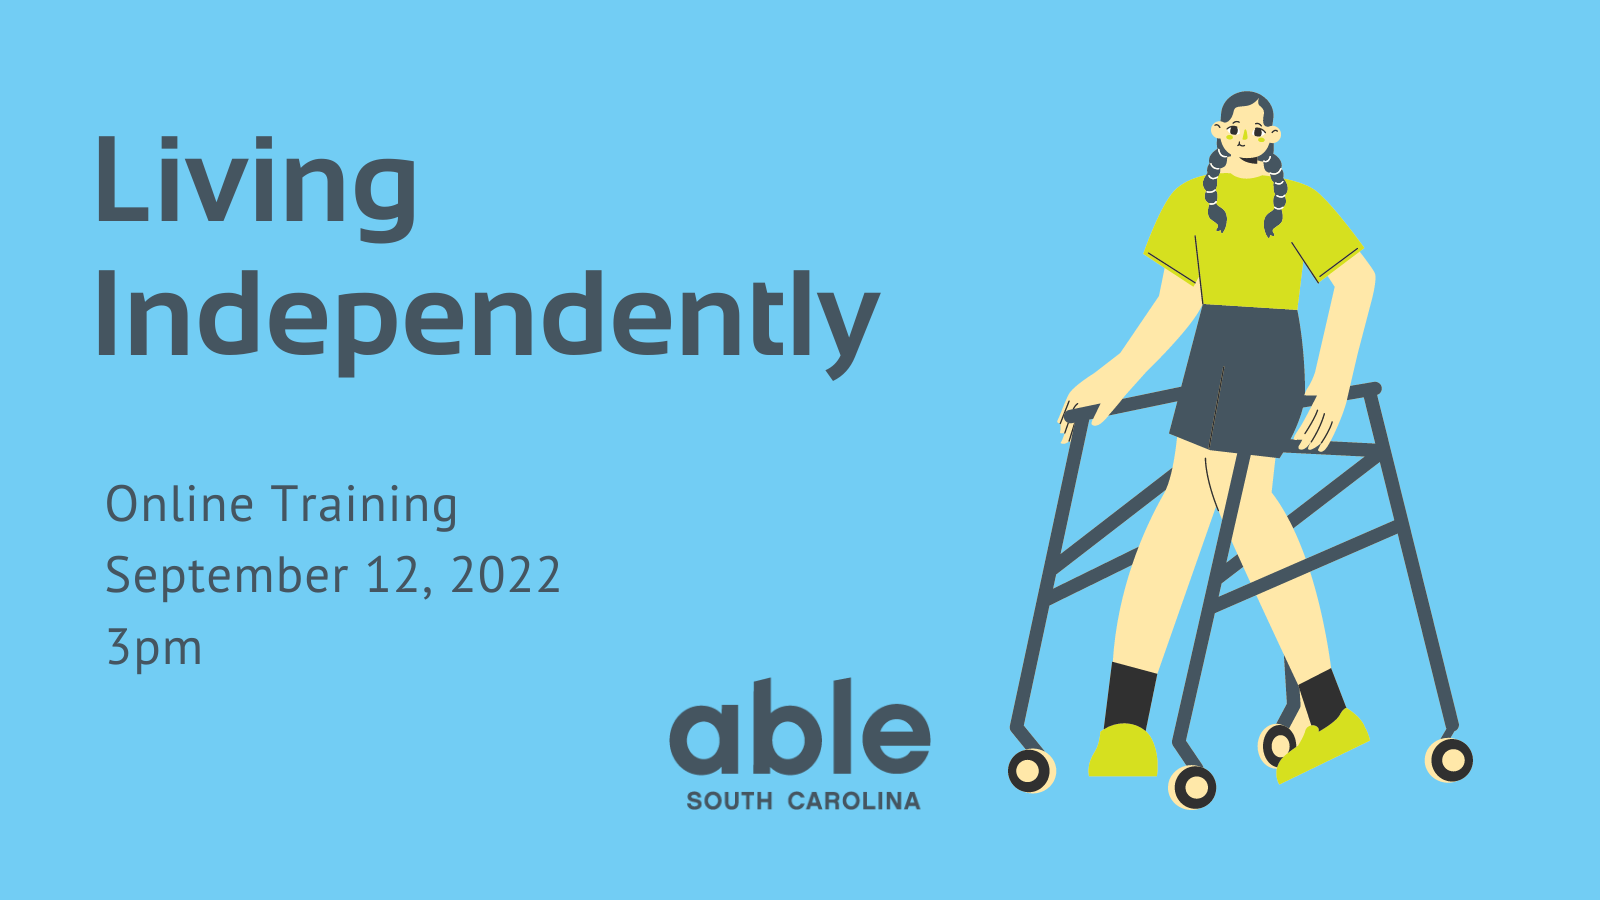 Graphic with blue background and large gray text that reads, ‘Living independently, online training September 12, 2022, 3pm,’ with Able SC logo in the bottom right corner in gray. A cartoon illustration of a young woman using a walker appears to the right.